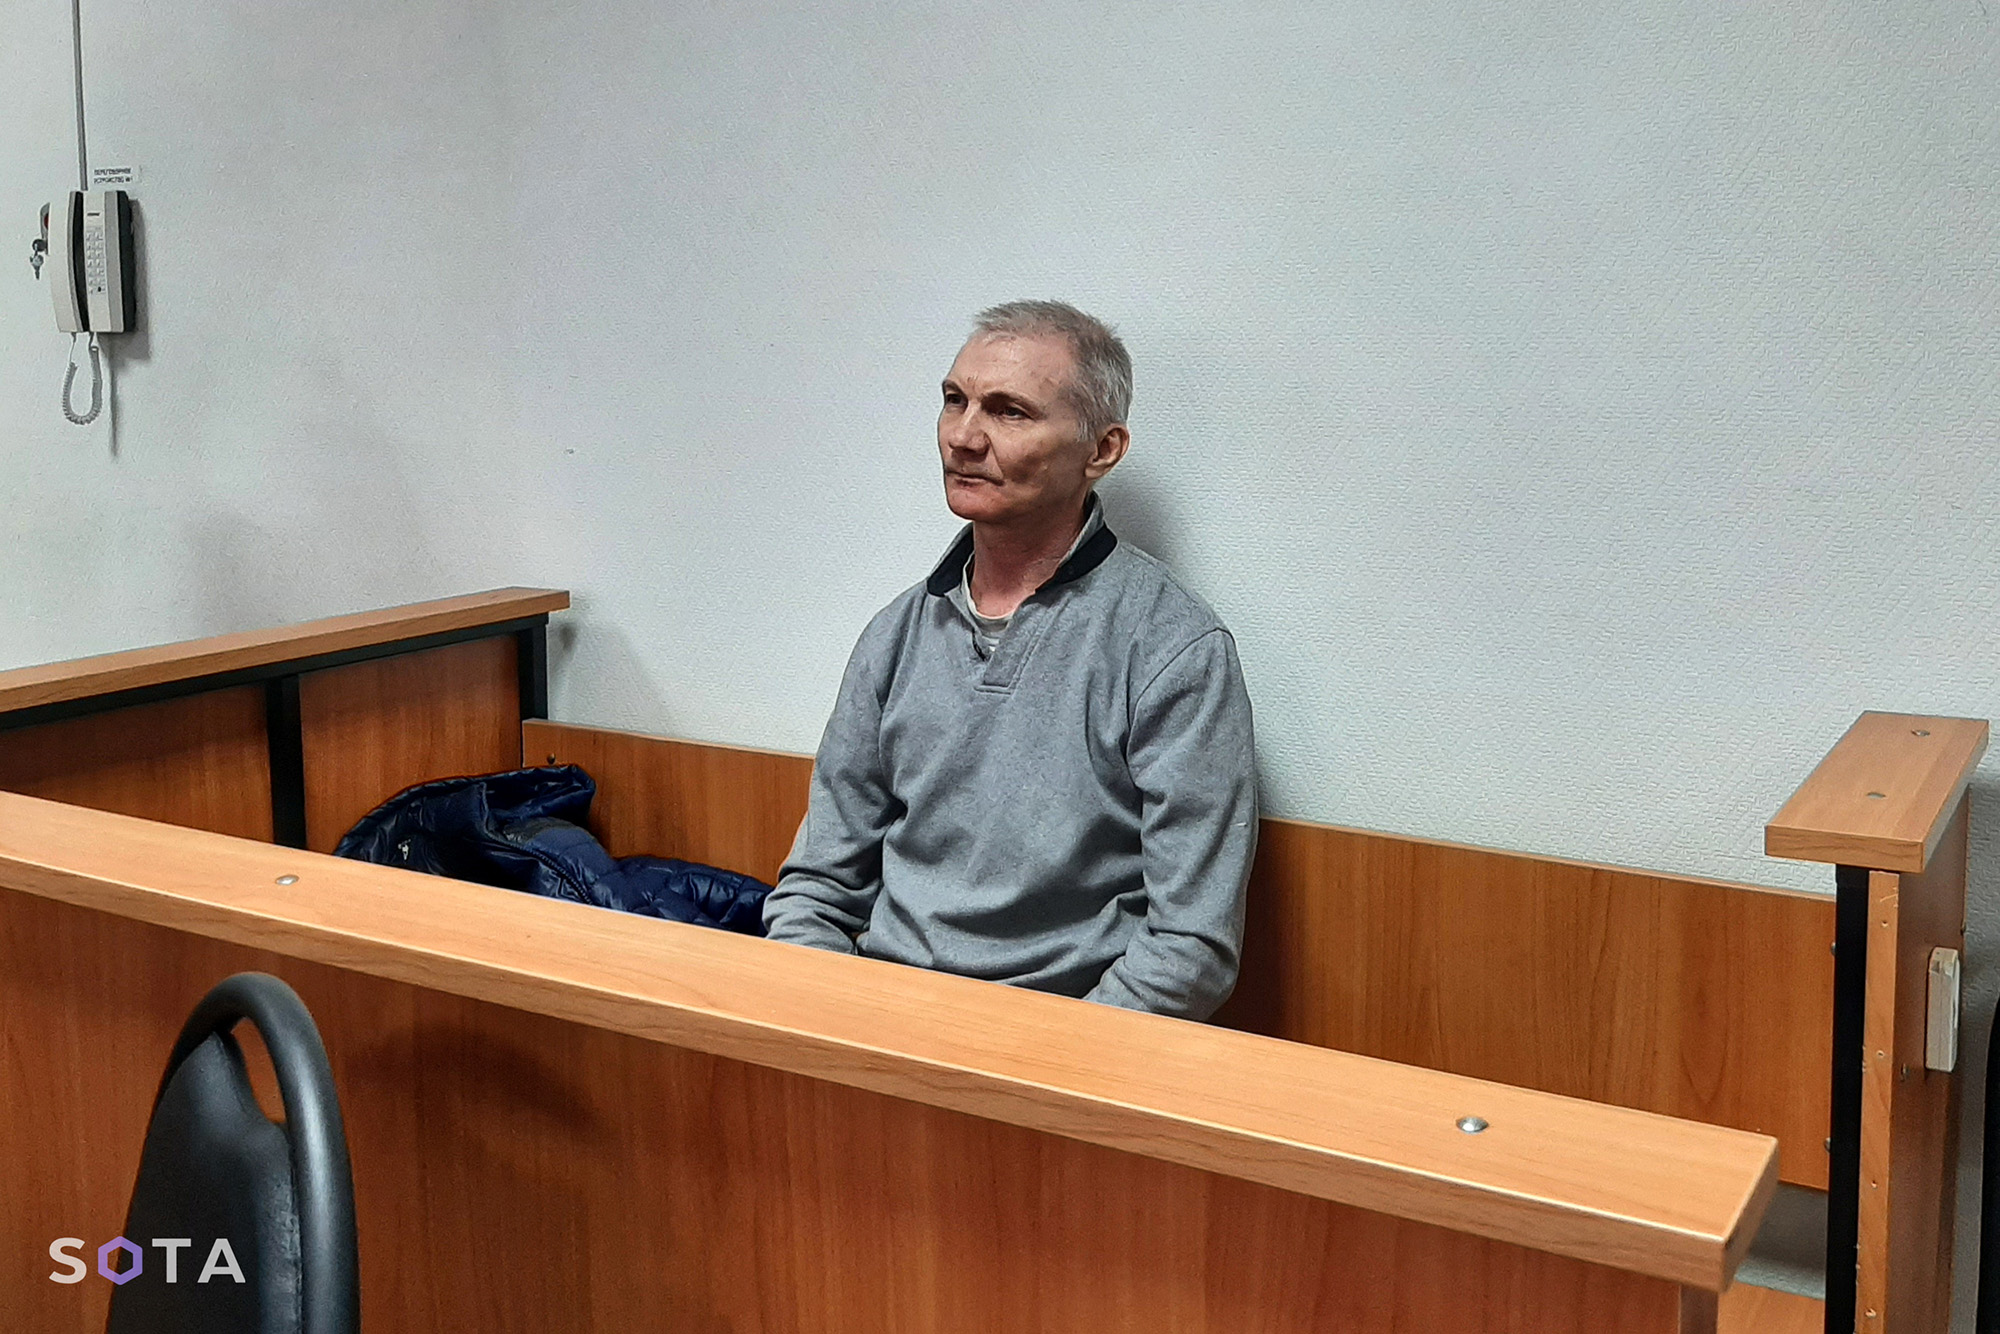 Russian citizen Alexei Moskalyov, who is accused of discrediting the country's armed forces in the course of Russia-Ukraine military conflict, attends a court hearing in the town of Yefremov in the Tula region, Russia, on March 27.